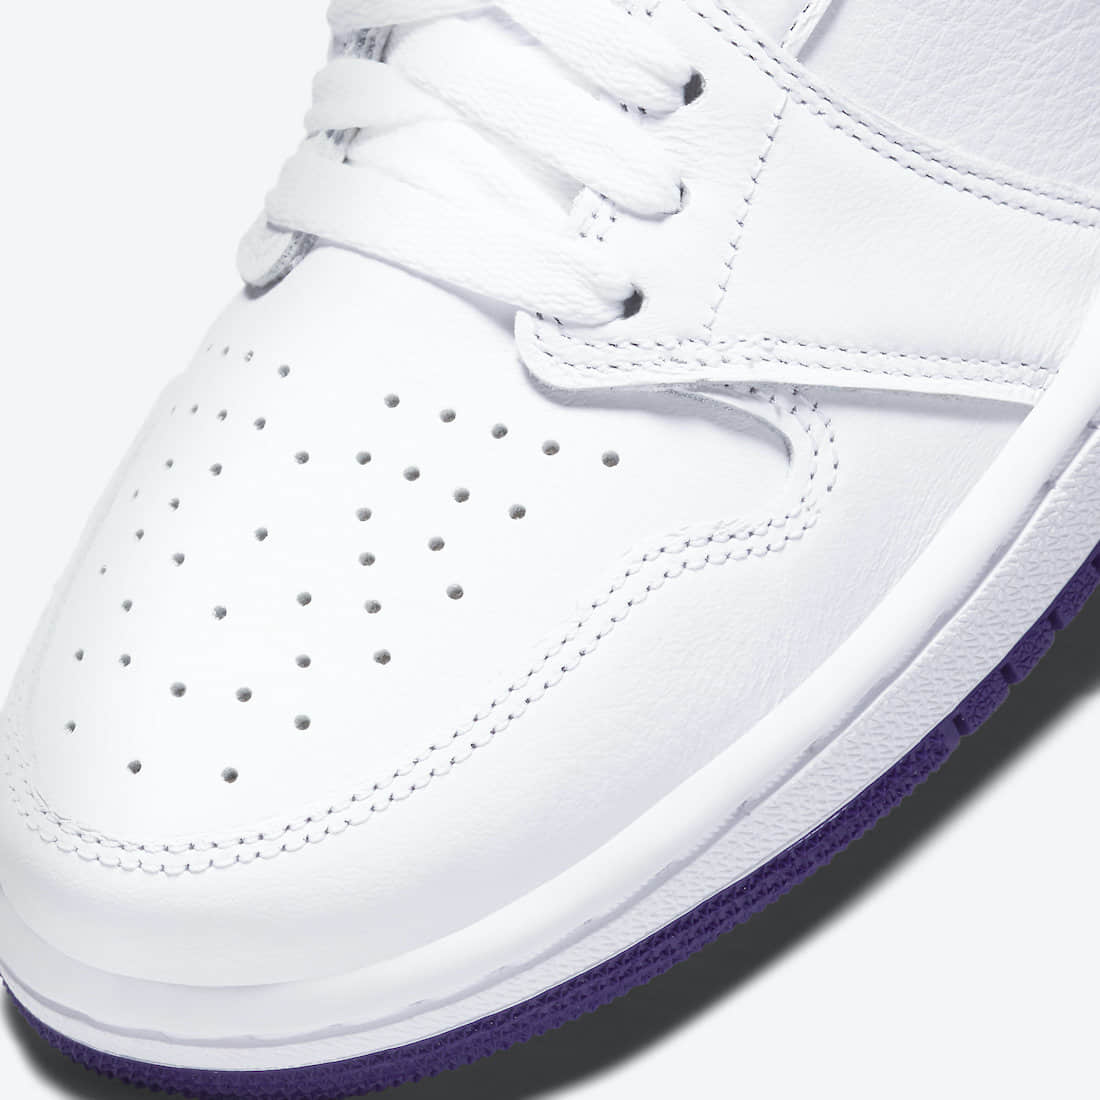 Air Jordan 1 High OG 'Court Purple' CD0461-151: Iconic Style Elevated with Court Purple | Limited Edition